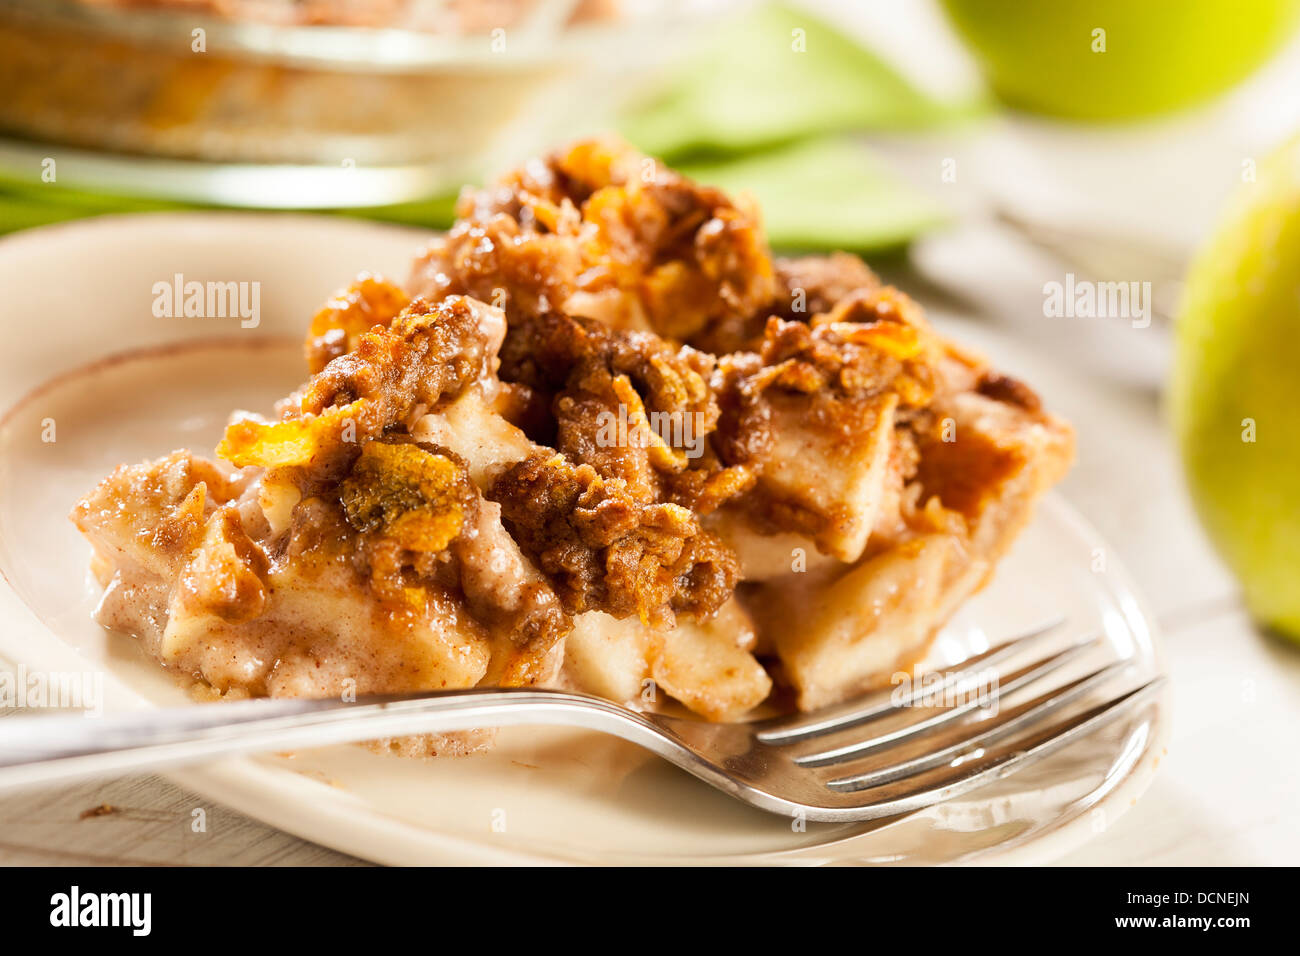 Homemade Apple Pie Dessert with a Crumble Top Stock Photo